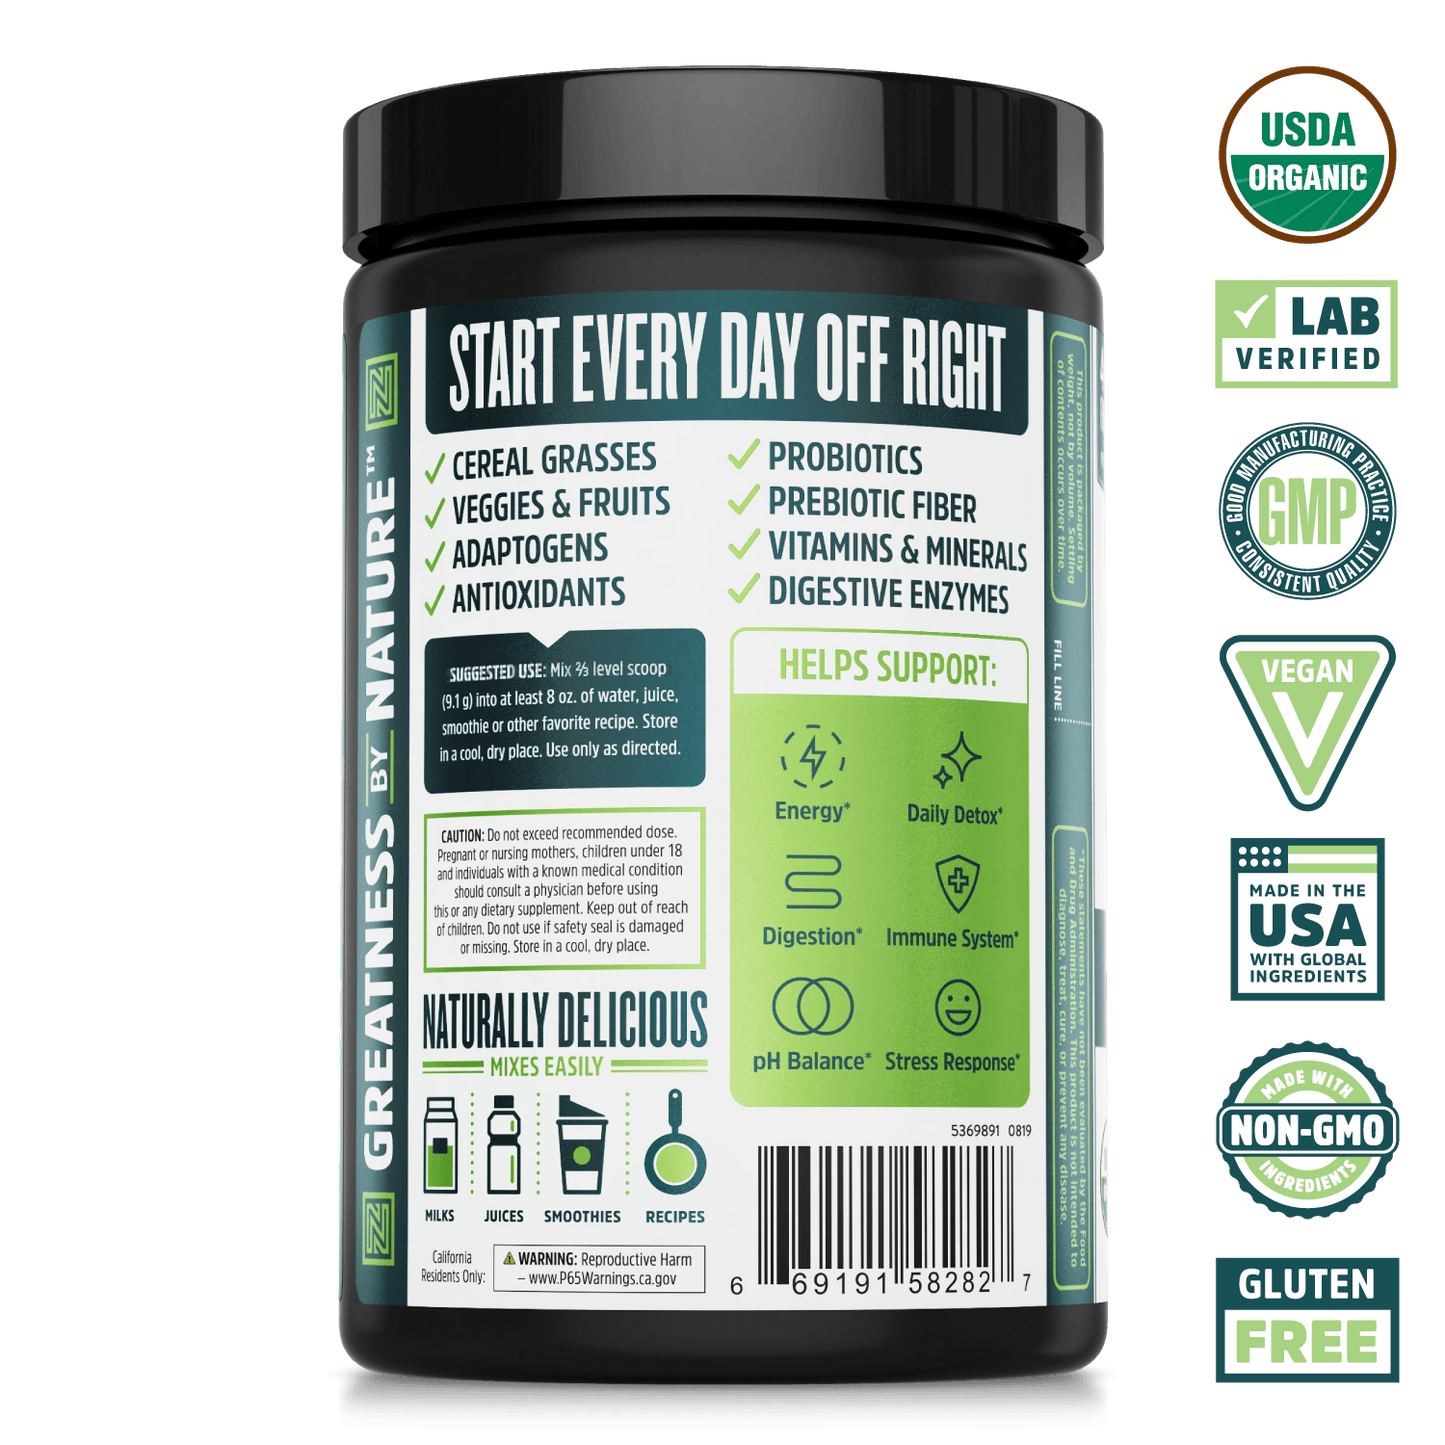 Zhou Nutrition Organic Deep Greens Micronutrient Powder Superfood. Bottle side. USDA organic, lab verified, good manufacturing practices, vegan, made in the USA with global ingredients, made with non-GMO ingredients, gluten free.